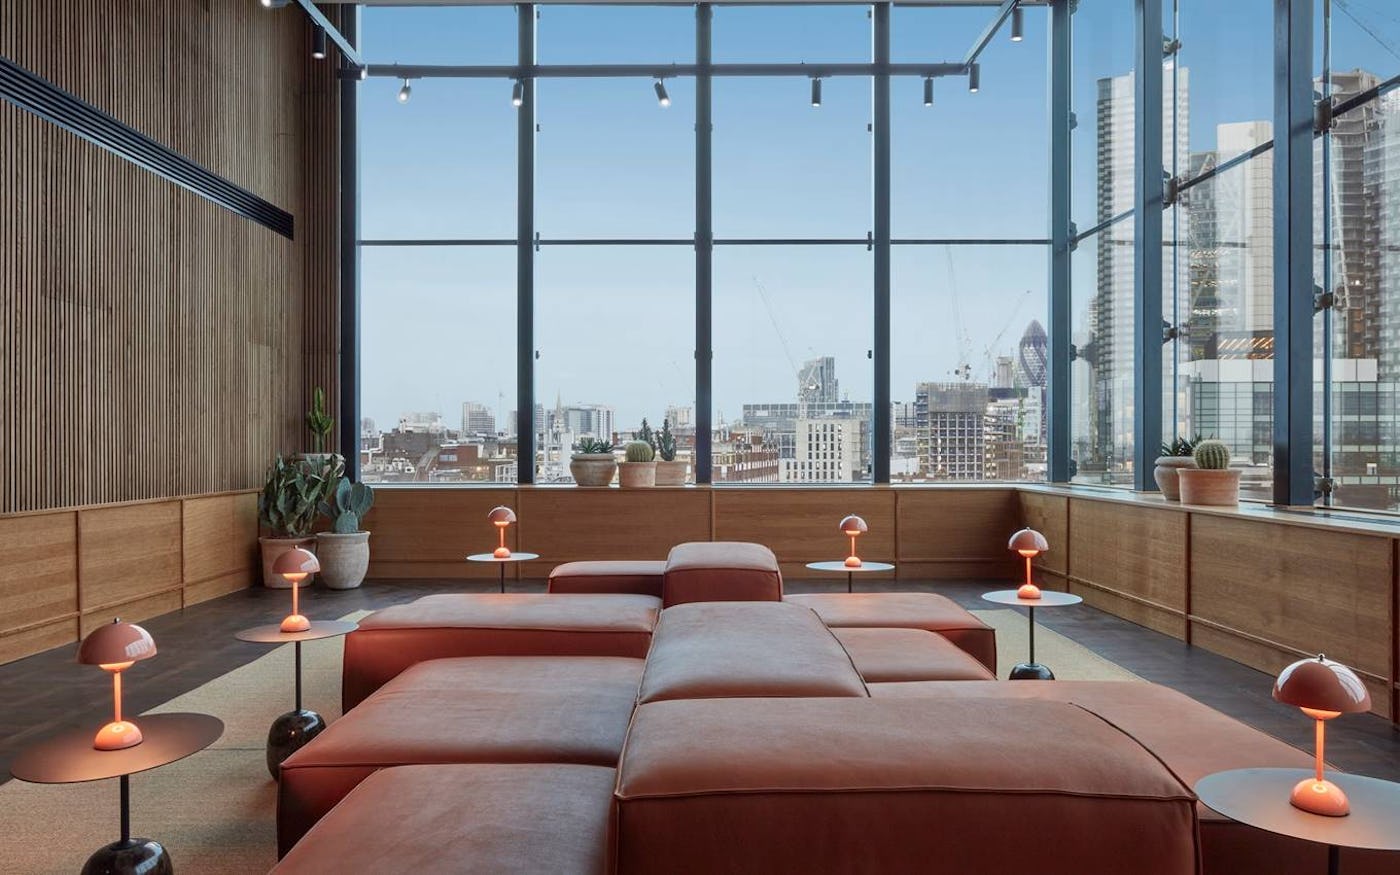 Modern lounge with large brown sectional sofa and unique lamps, set against floor-to-ceiling windows overlooking a cityscape.